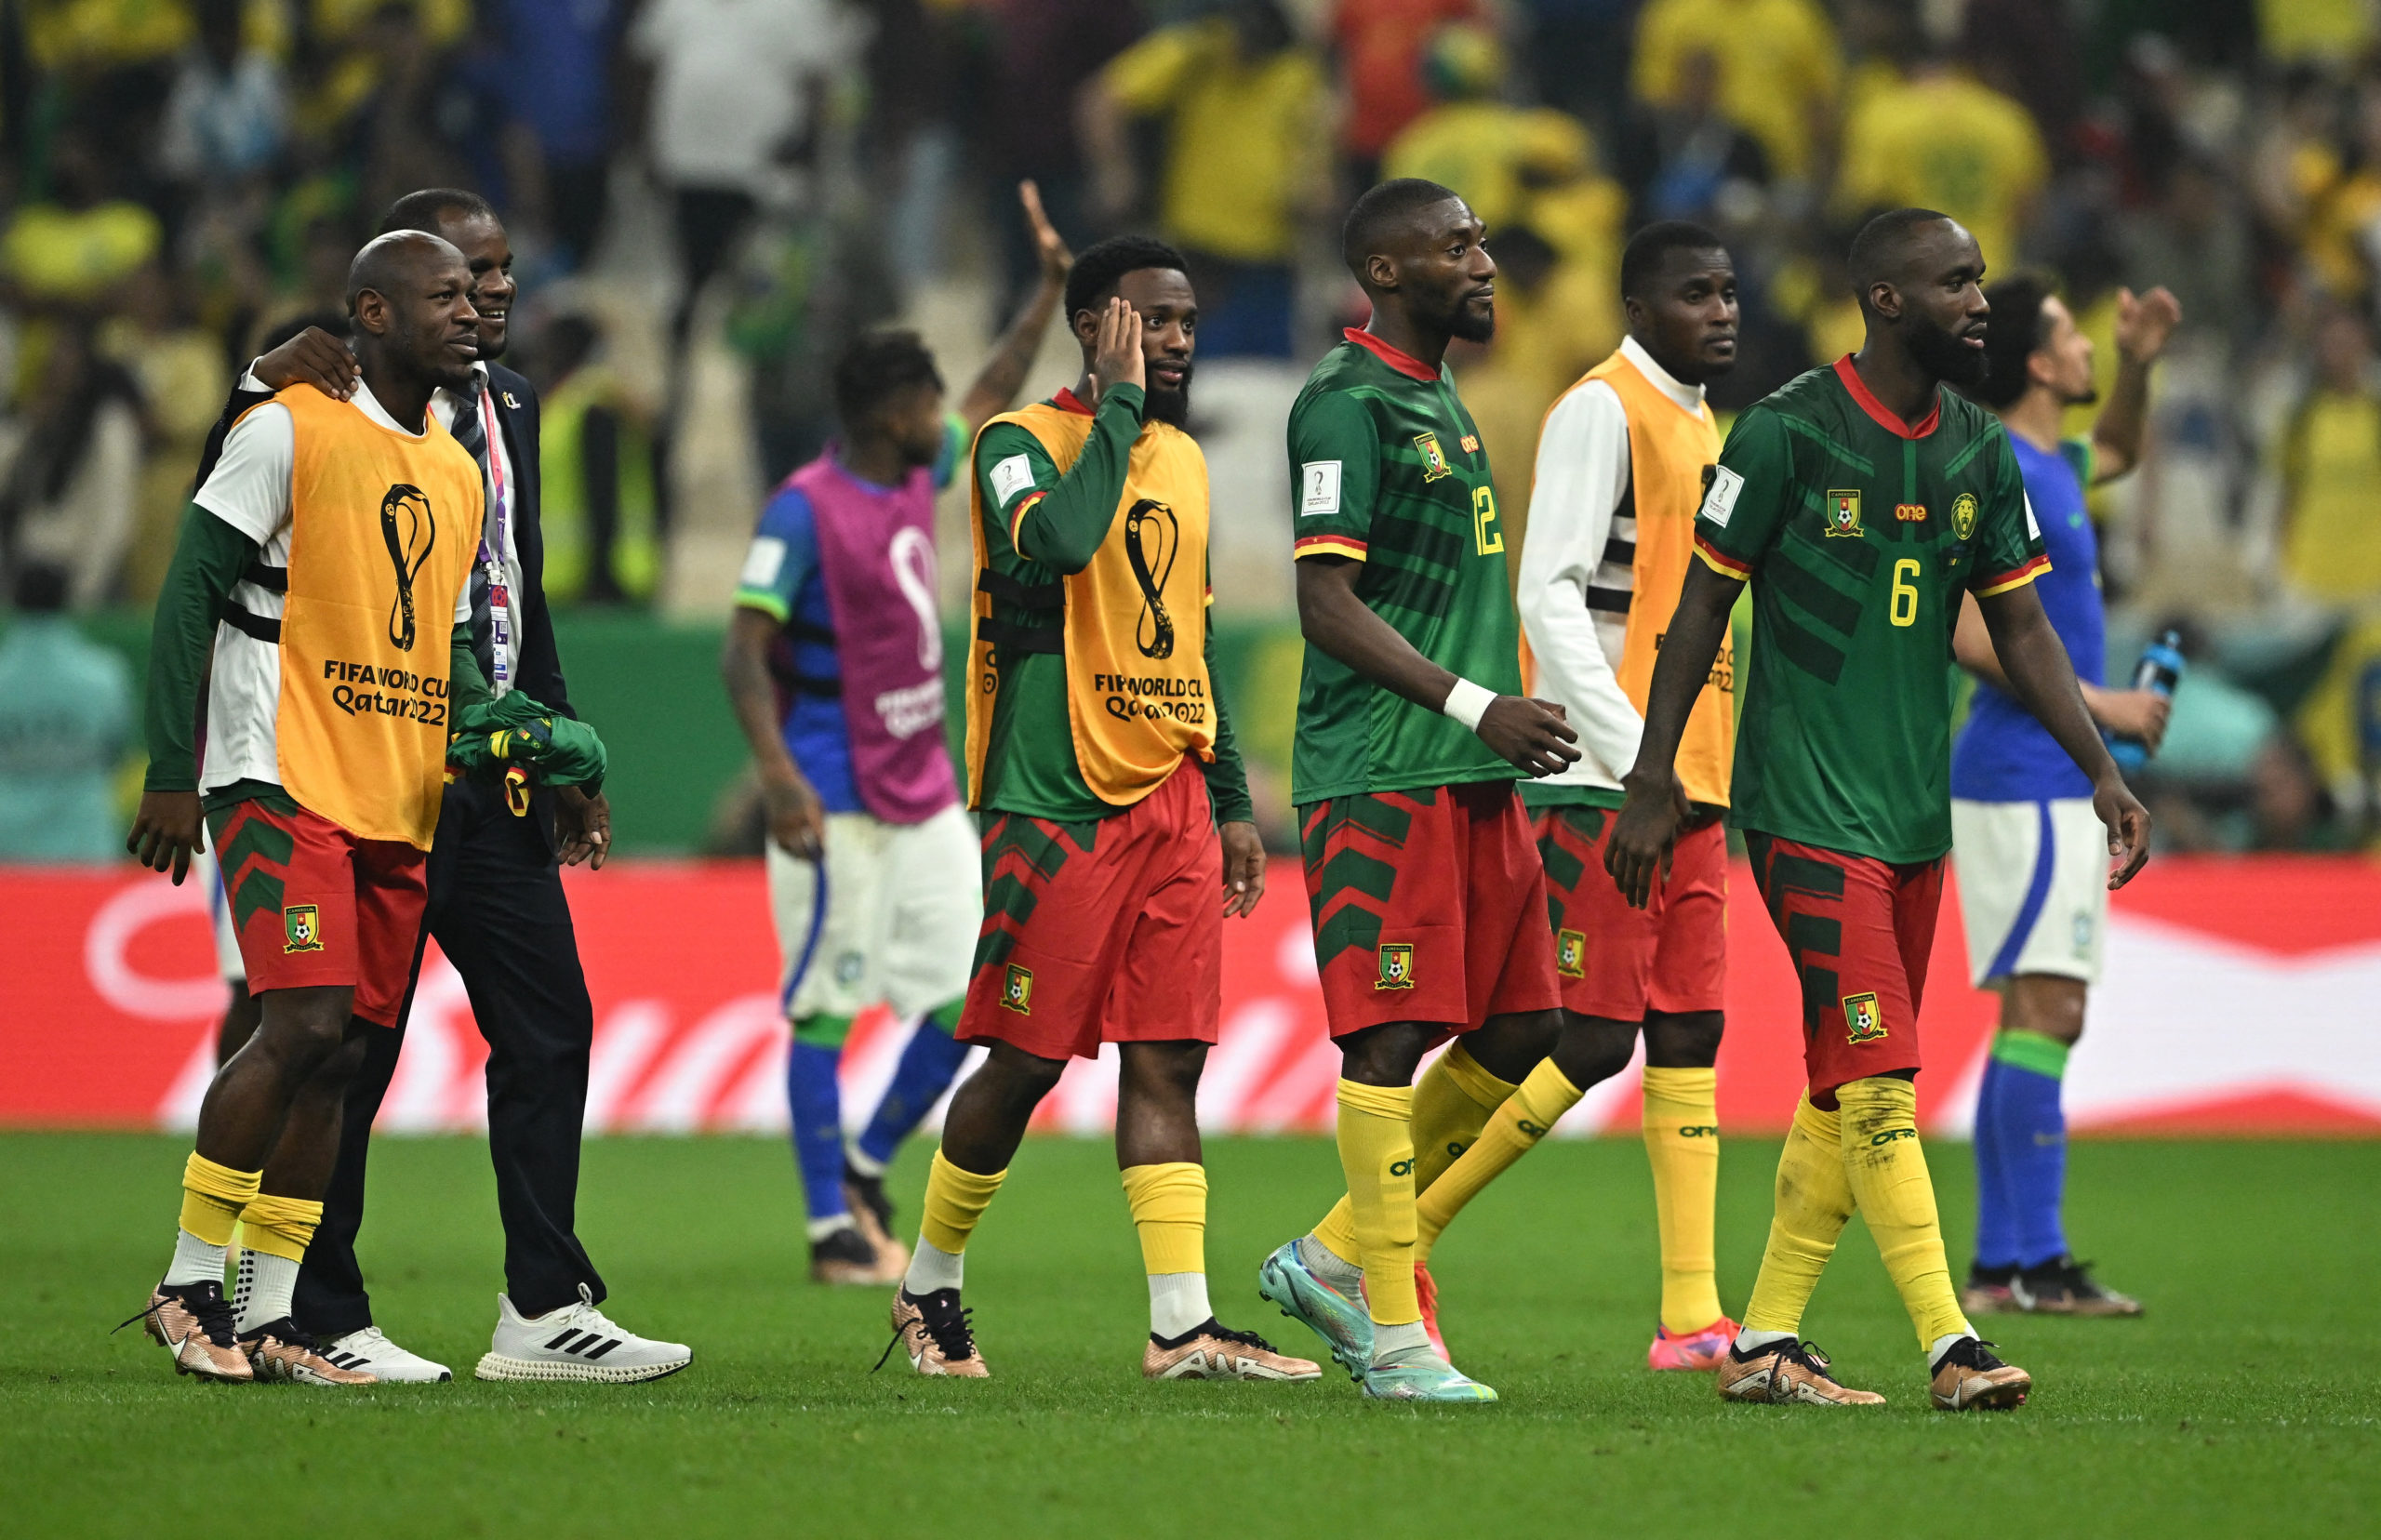 Soccer Football - FIFA World Cup Qatar 2022 - Group G - Cameroon v Brazil - Lusail Stadium, Lusail, Qatar - December 2, 2022 Cameroon's Nicolas Moumi Ngamaleu with team mates looks dejected as Cameroon are knocked out of the World Cup 